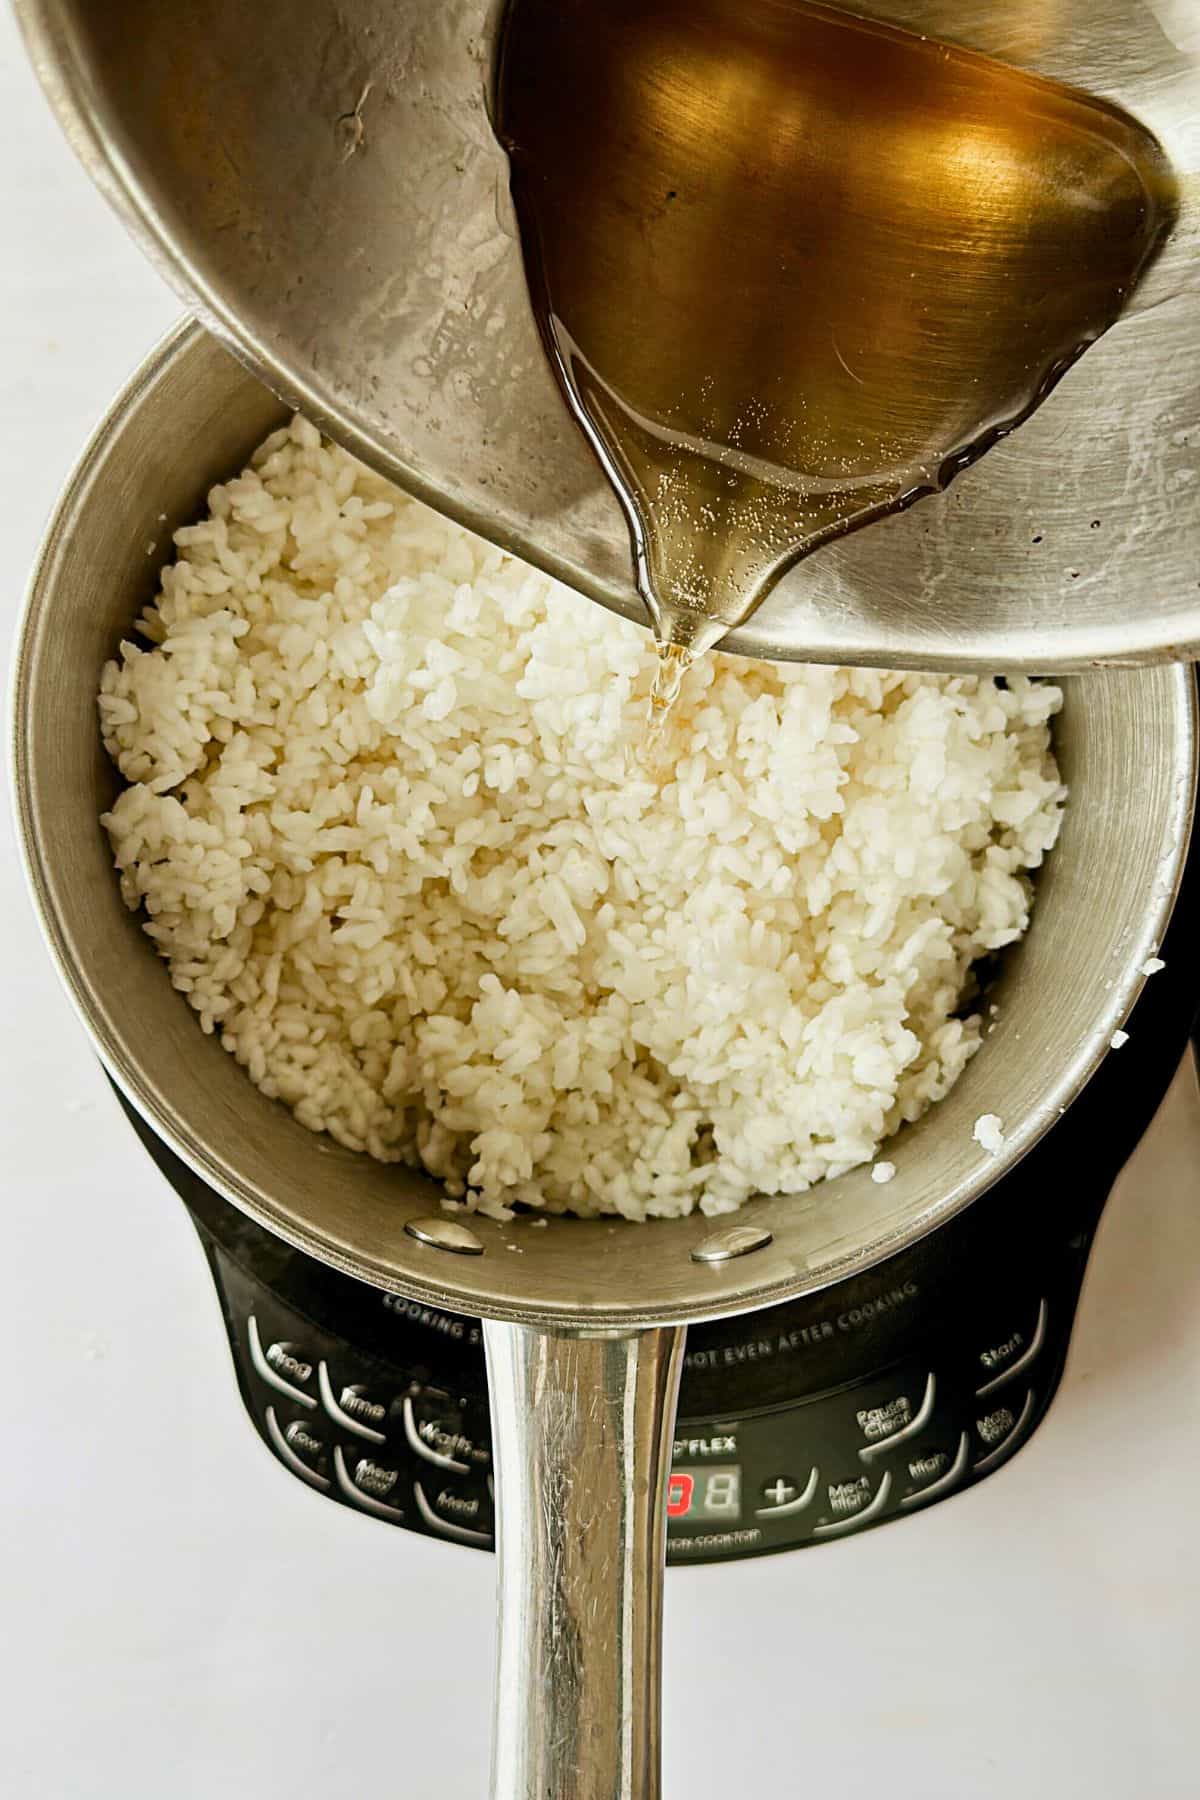 adding sugar mixture to cooked sushi rice